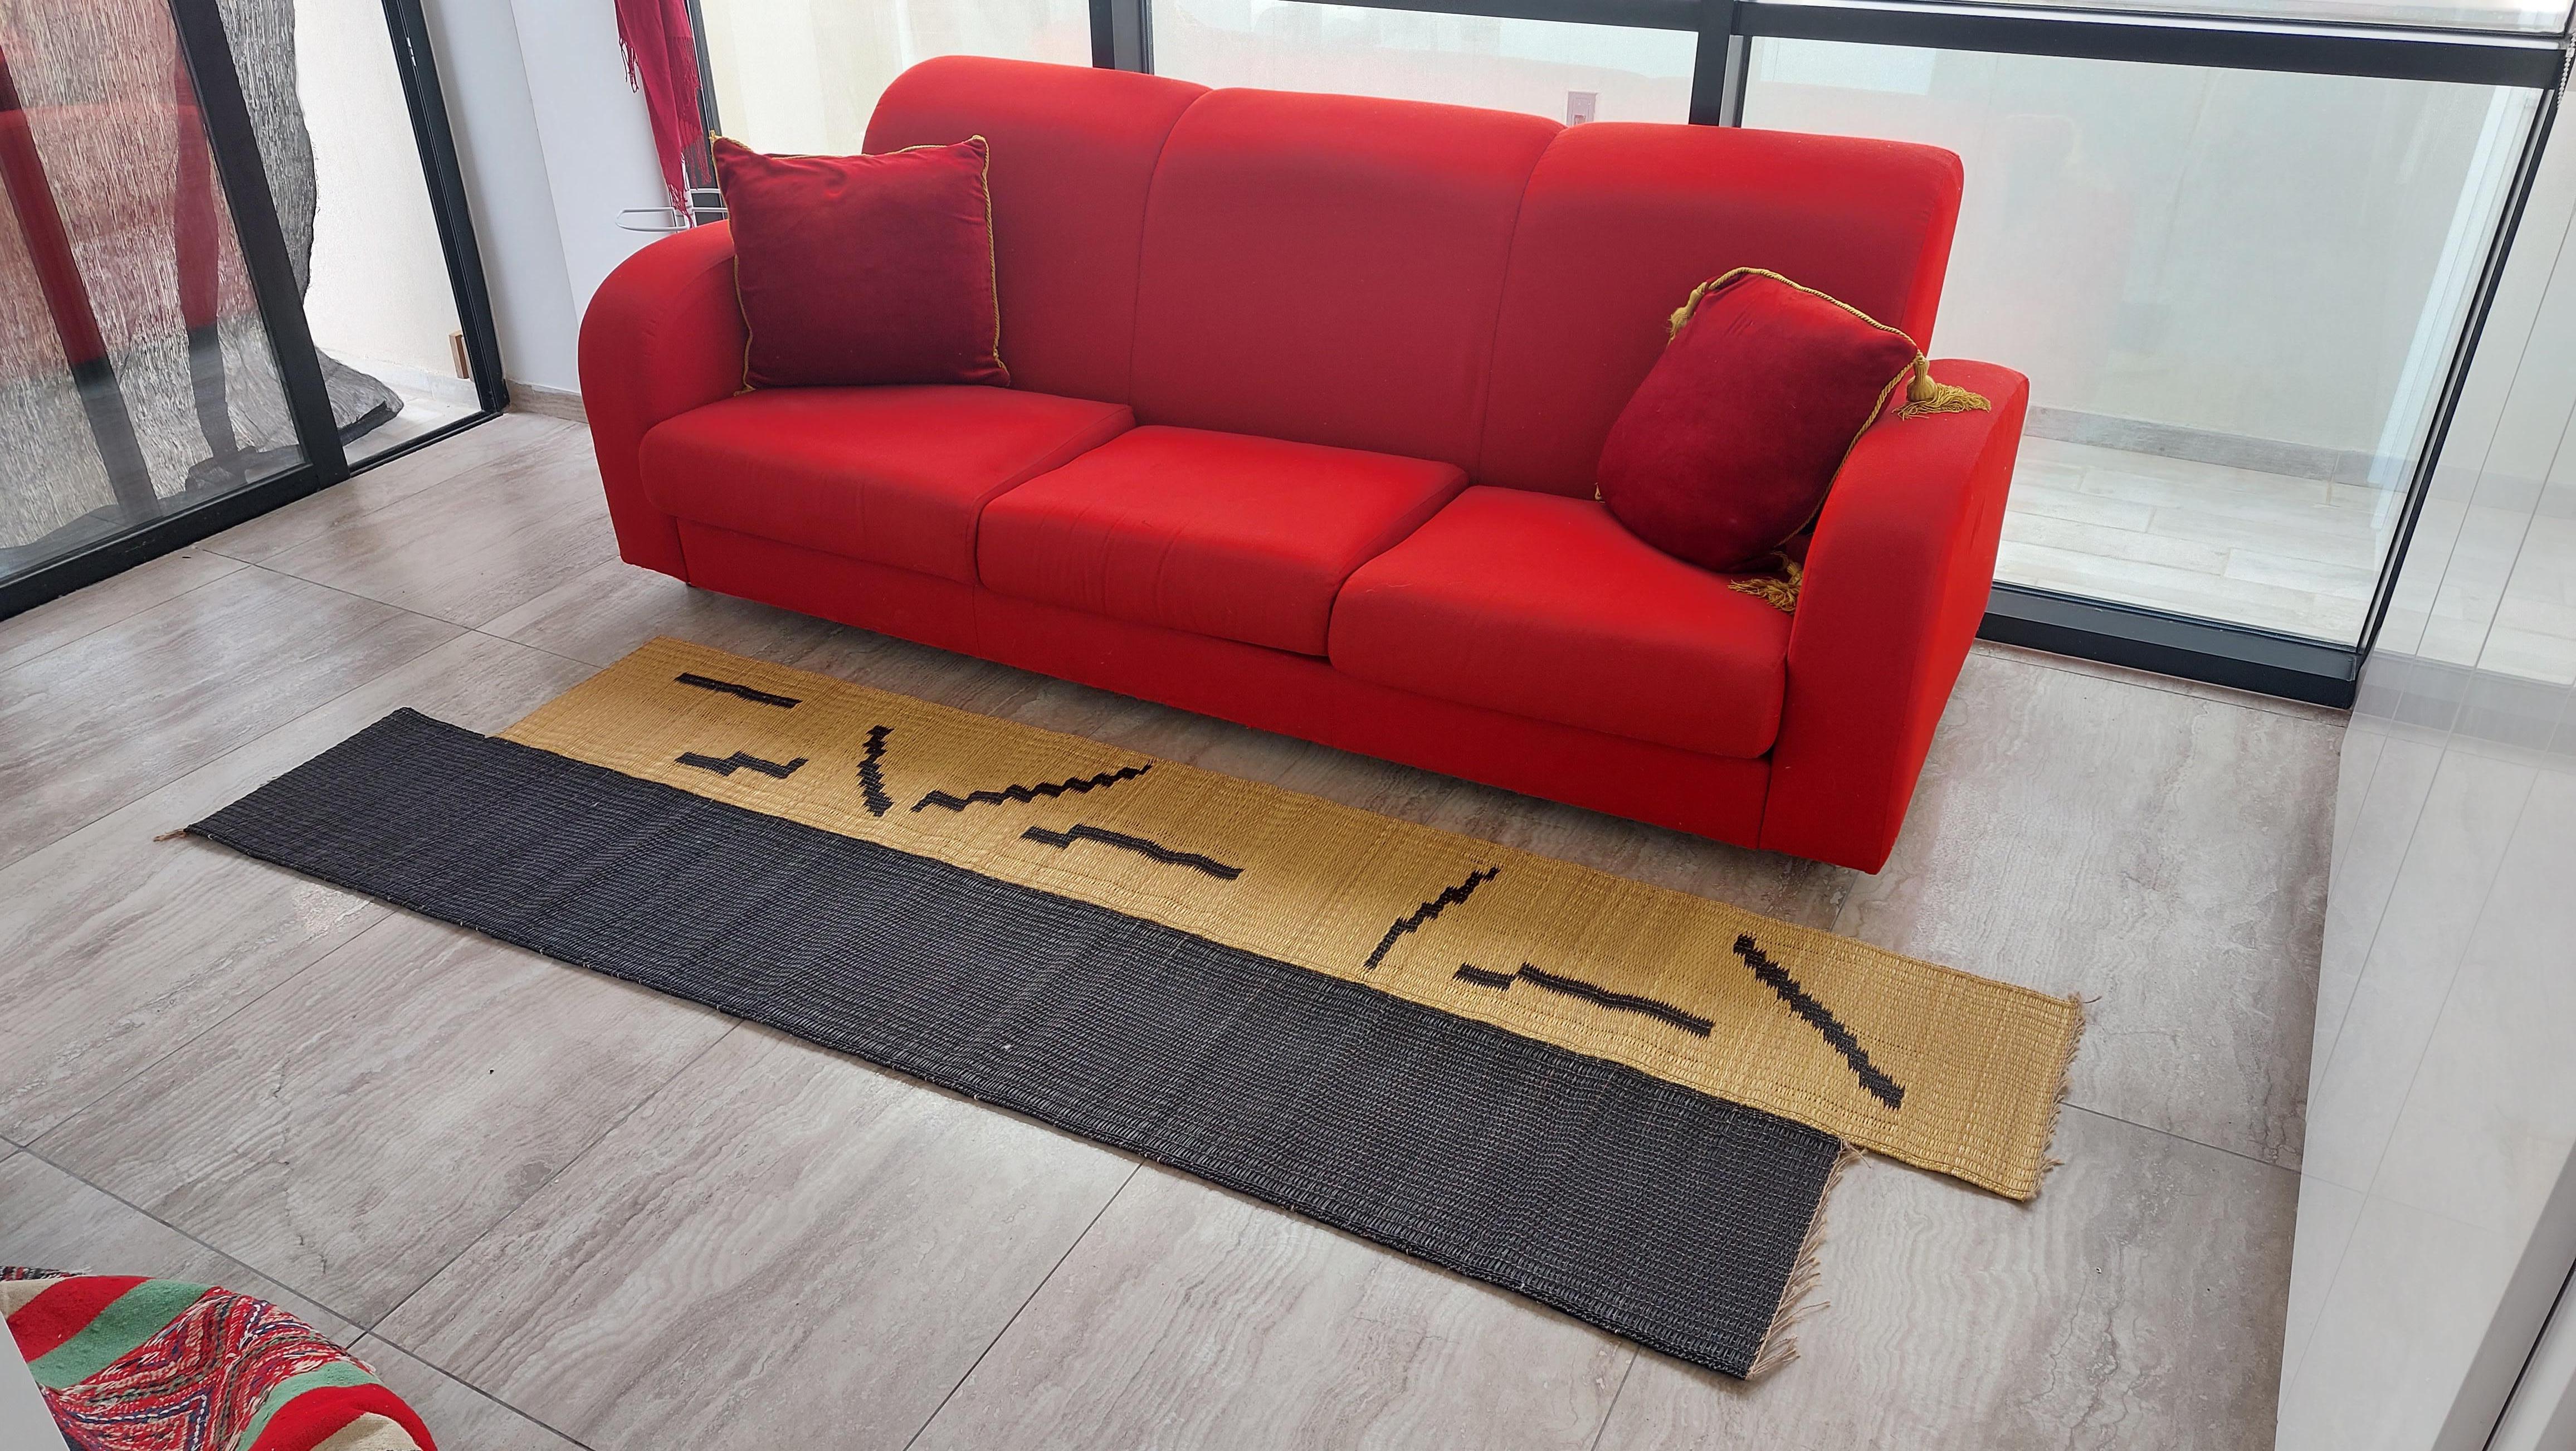 This runner rug, through its irregular shape, reflects a new way of assembling mats in 2 staggered bands, and reflects the contribution of design crafts in the art of weaving mats in Smar (sea rush).
This irregularly shaped natural fiber rug